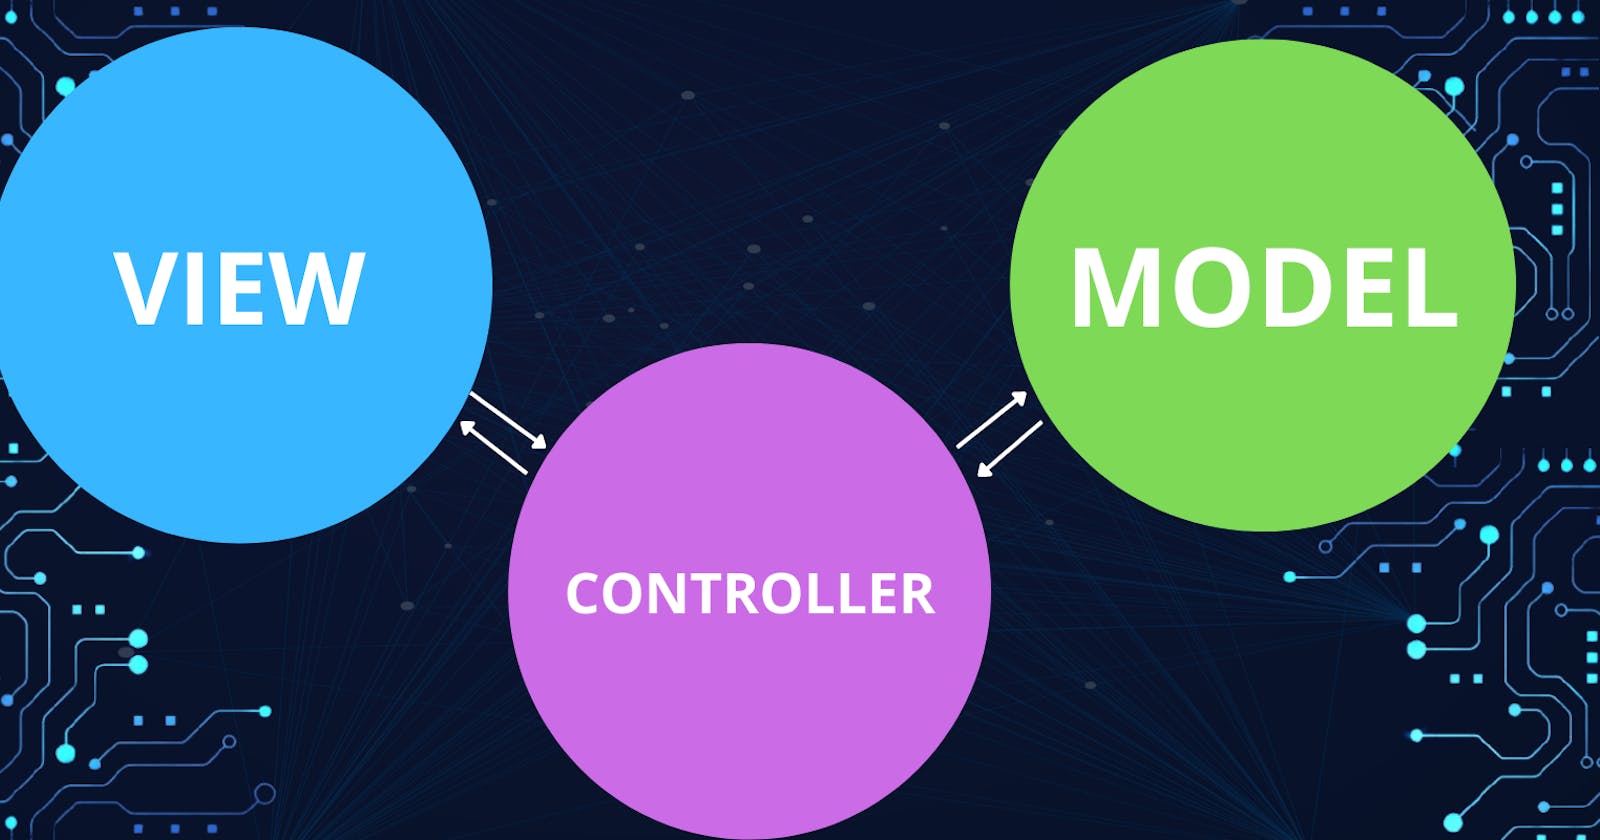 What is MVC?